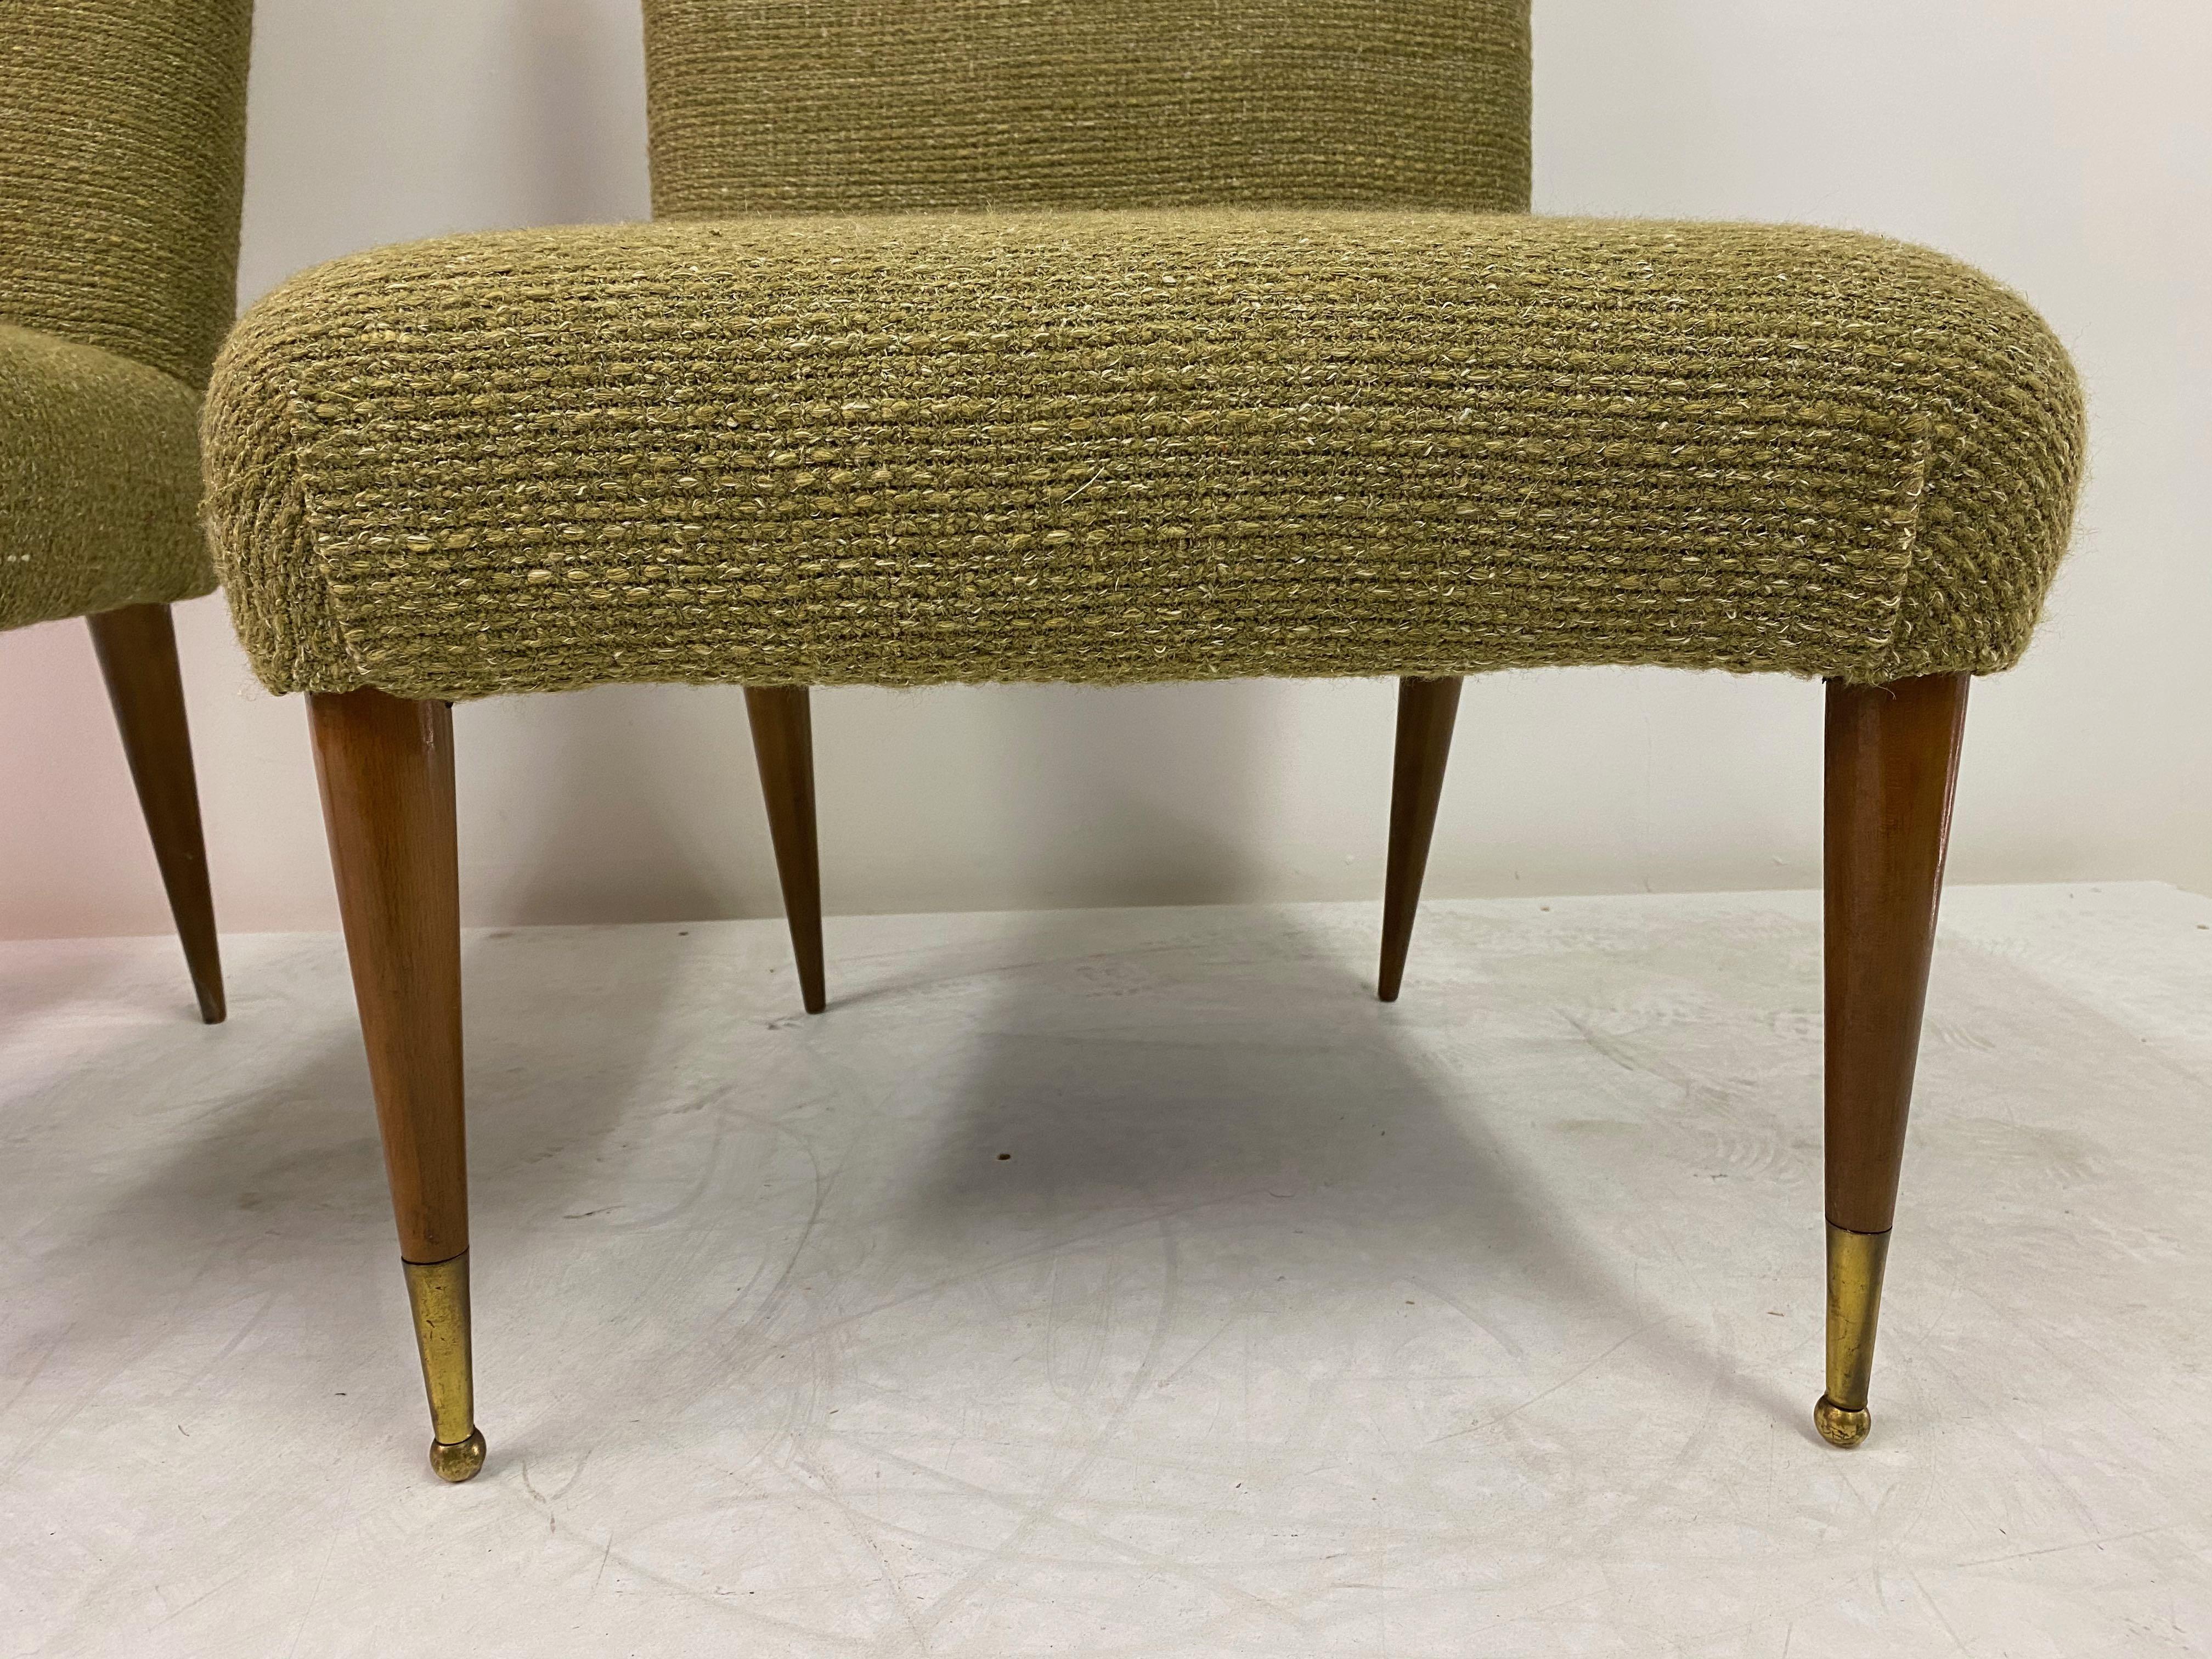 Midcentury Pair of Italian 1950s Slipper Chairs in Green Wool Linen Blend In Good Condition In London, London